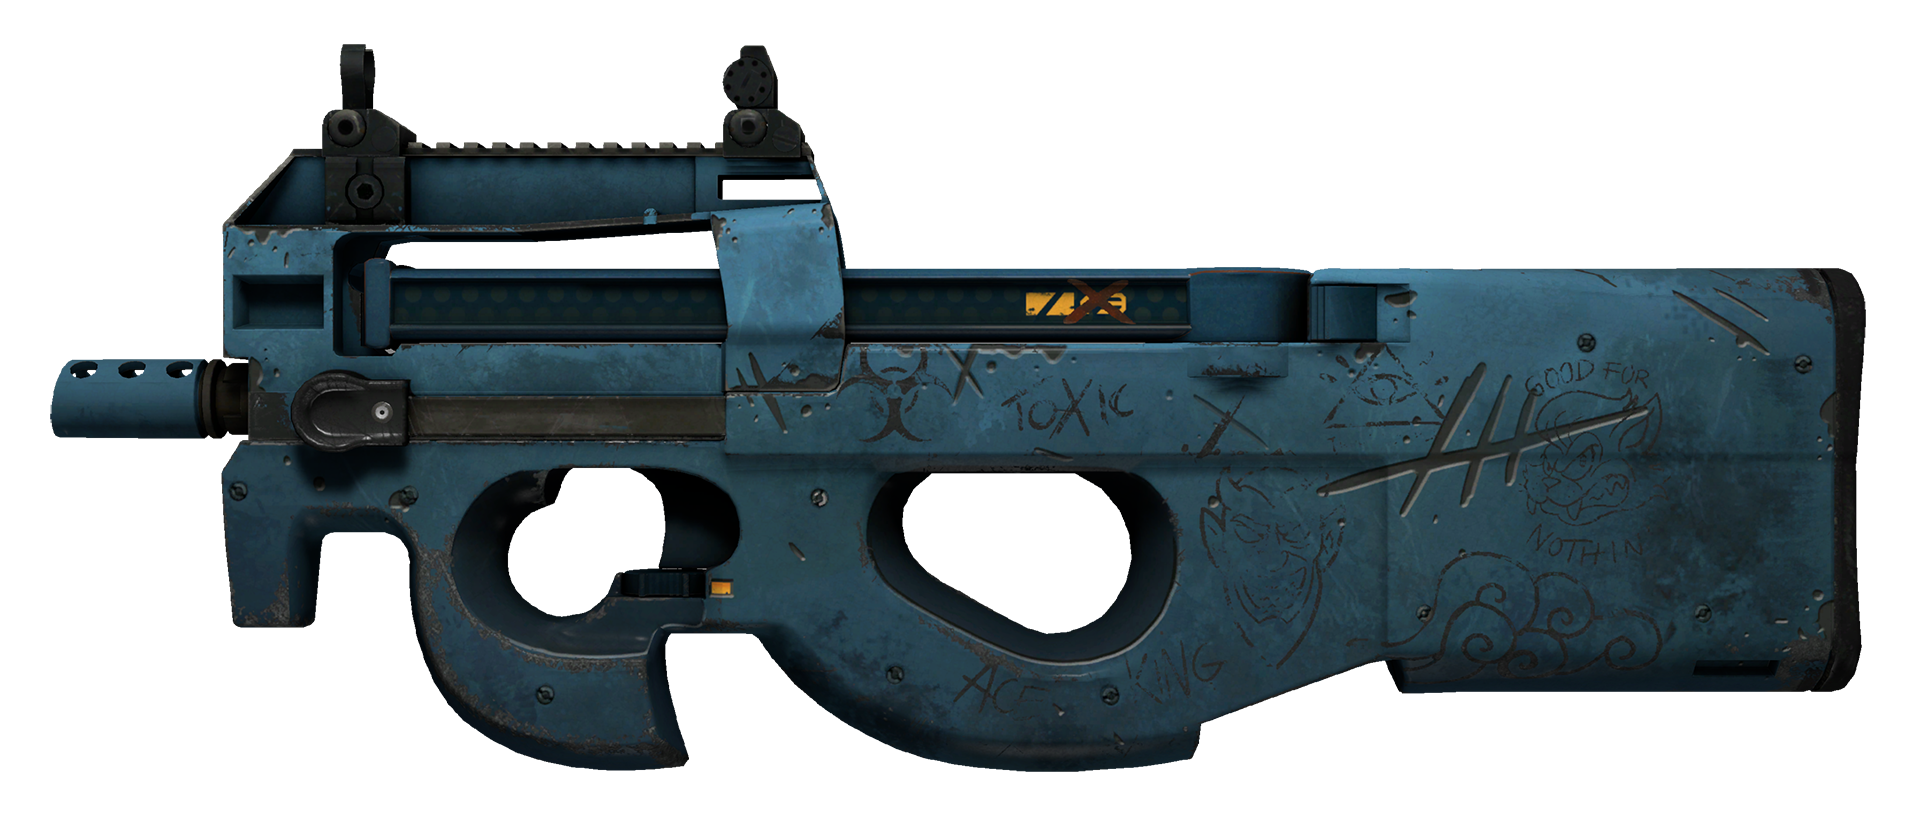 P90 Off World Large Rendering